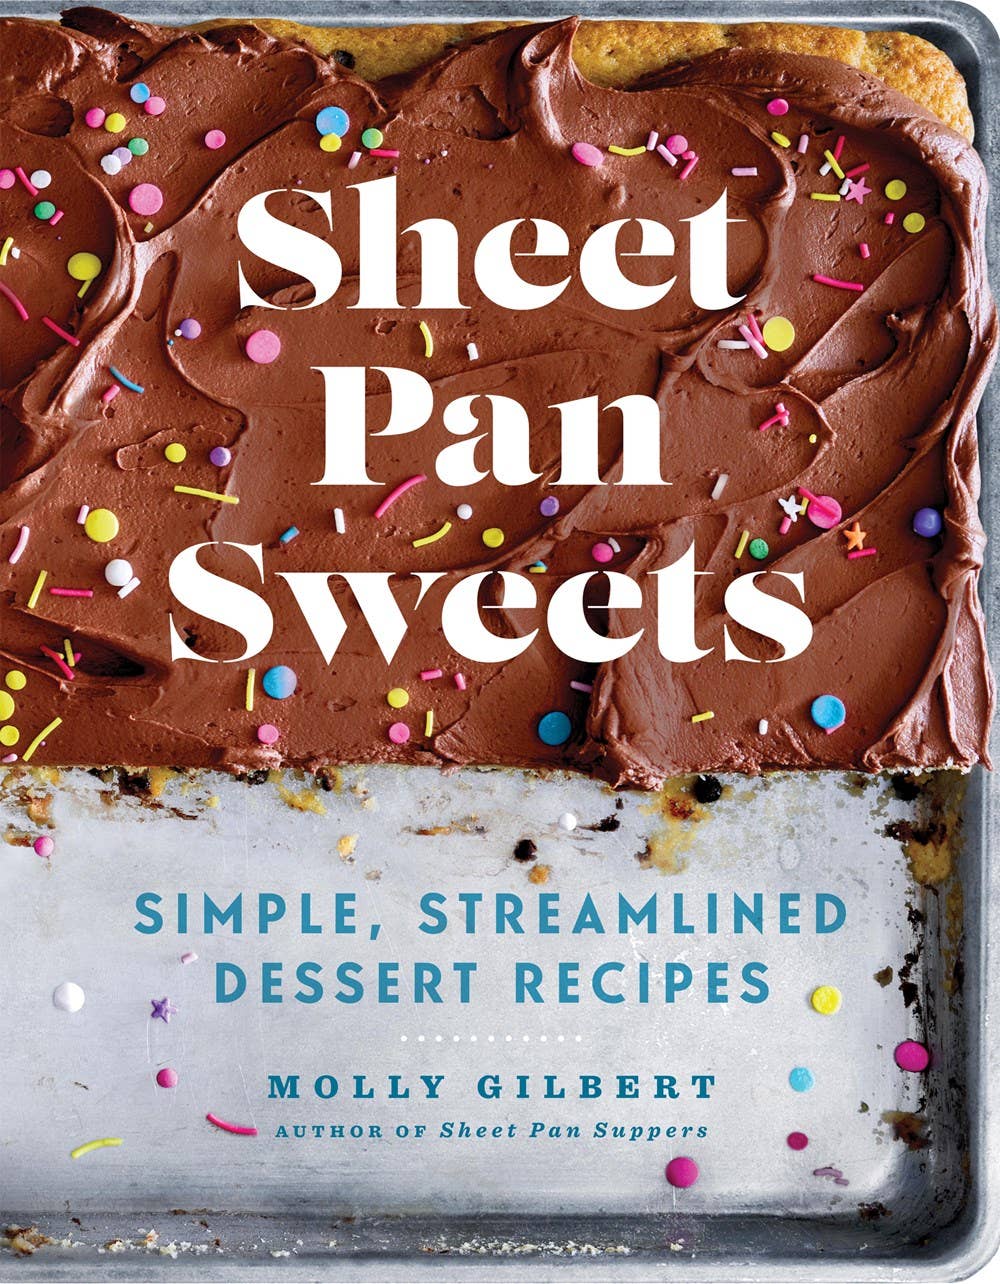 Limes　Lemons　Streamlined　Desserts　and　Simple,　–　Boutique　Sweets:　Pan　Sheet　Cookbook